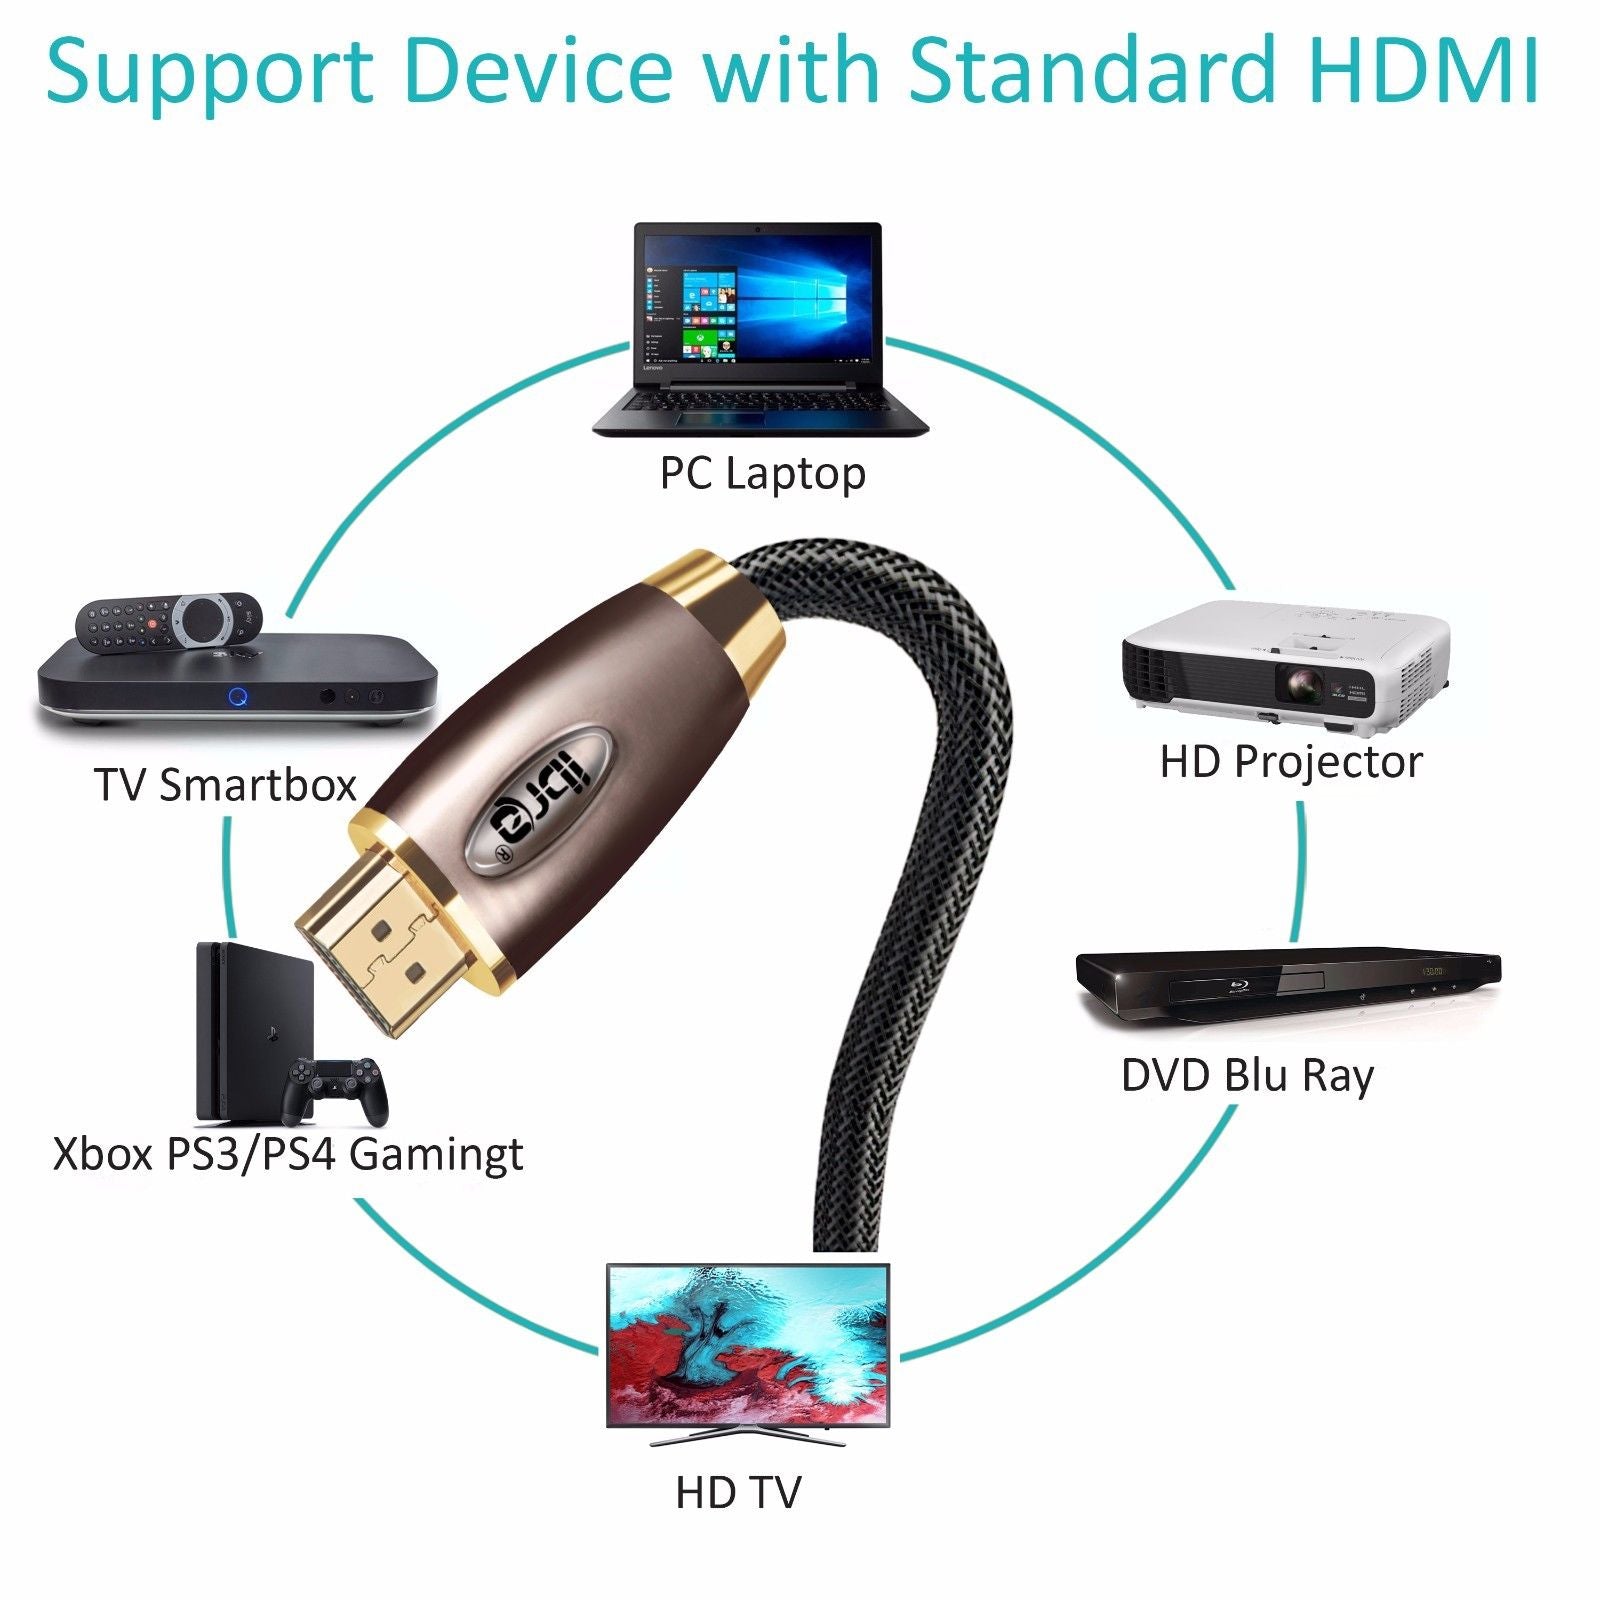 HDMI Cable 1M - 4K UHD HDMI 2.0(4K@60Hz) Ready -18Gbps-28AWG Braided Cord -Gold Plated Connectors -Ethernet,Audio Return -Video 4K 2160p,HD 1080p,3D -Xbox PlayStation PS3 PS4 PC Apple TV -IBRA RED